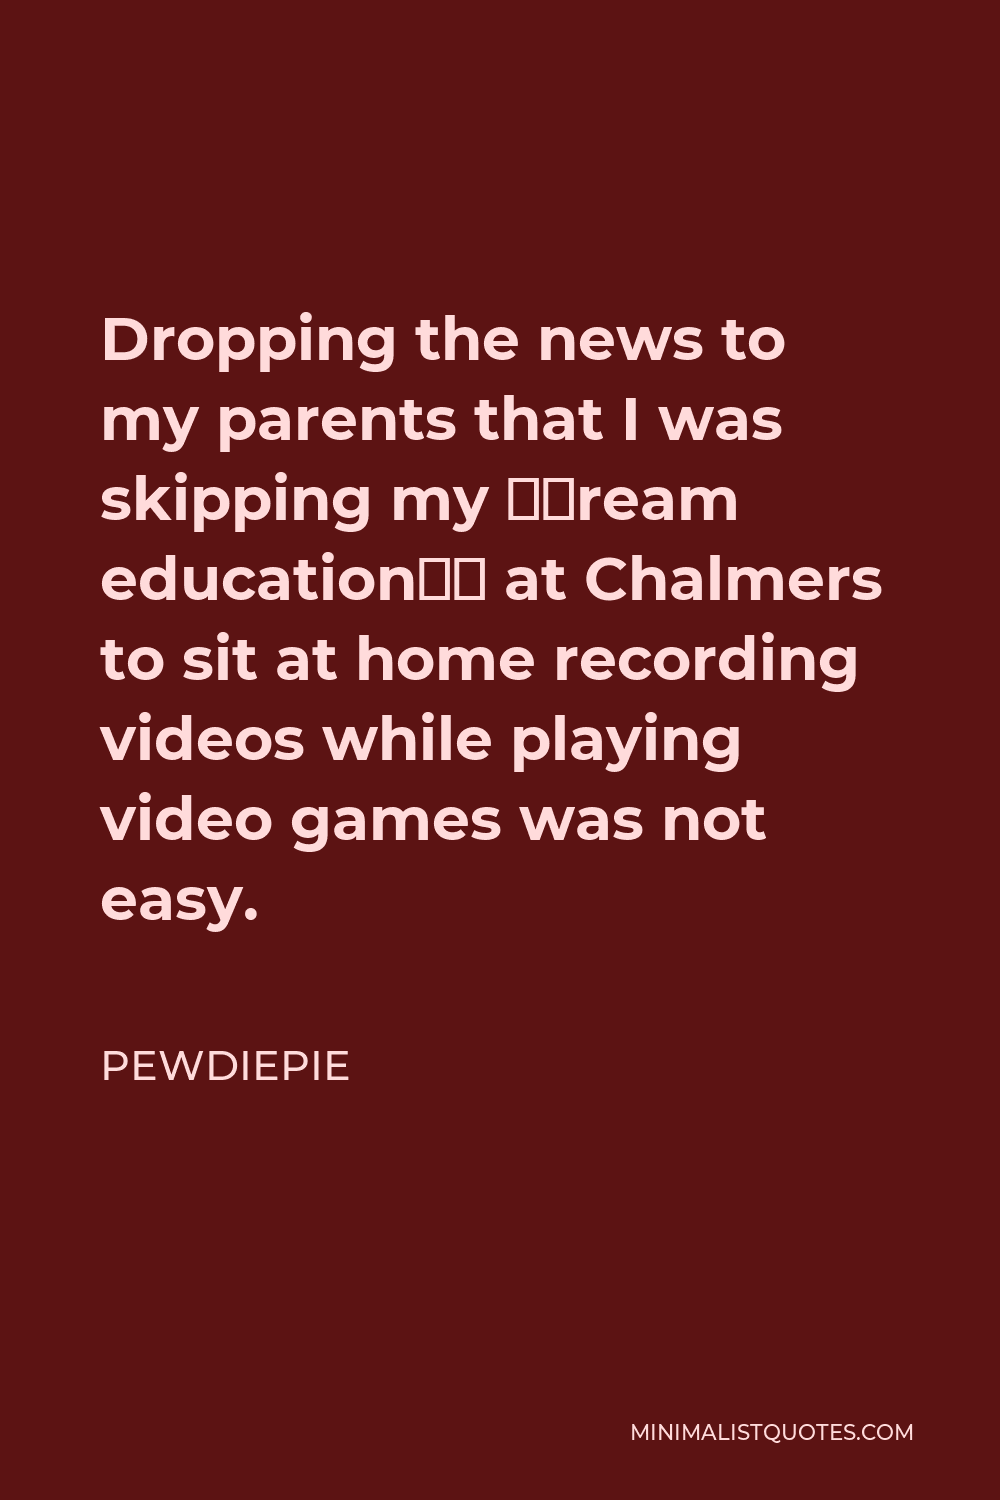 PewDiePie Quote - Dropping the news to my parents that I was skipping my ‘dream education’ at Chalmers to sit at home recording videos while playing video games was not easy.